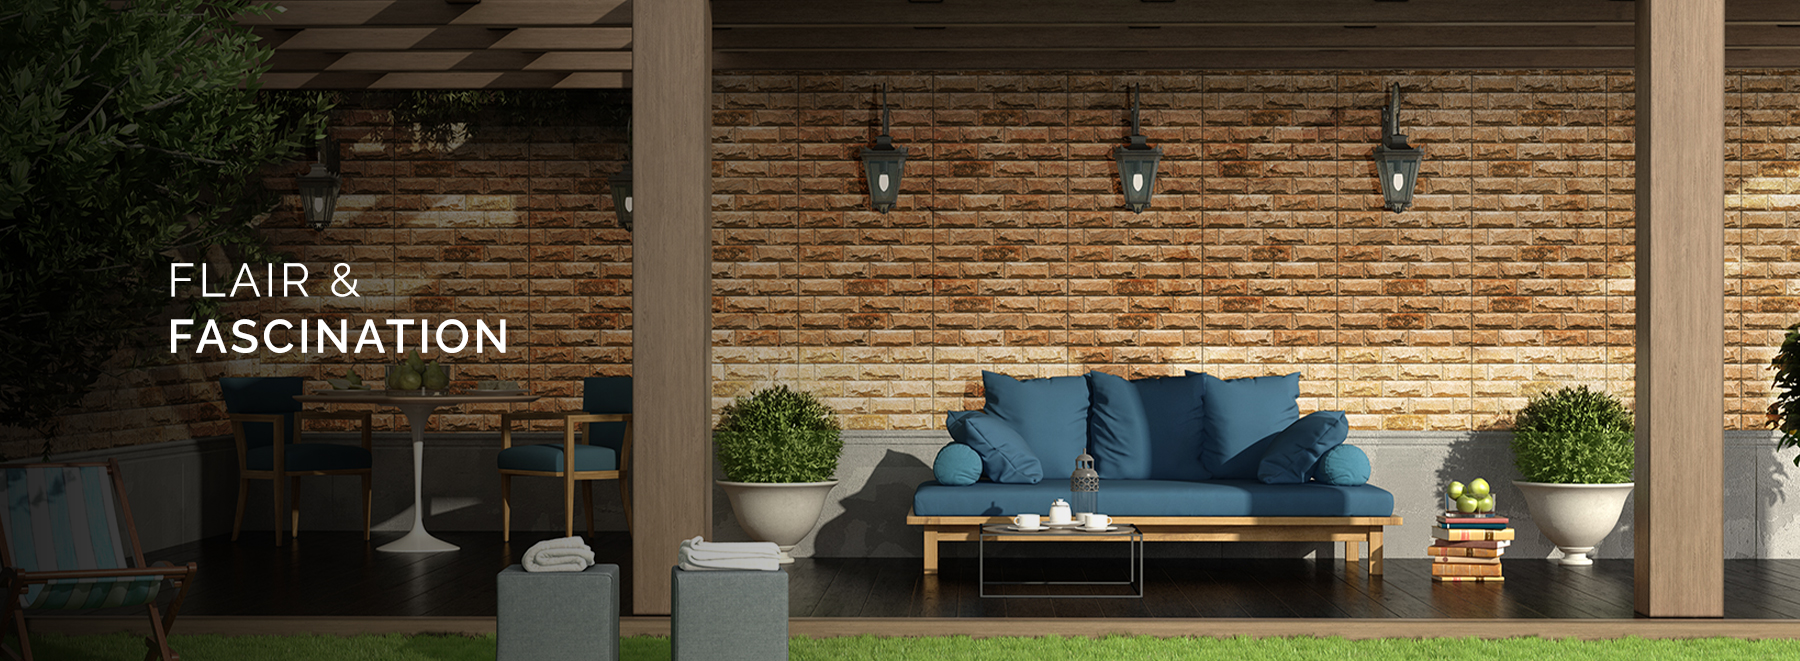 somany outdoor wall tiles